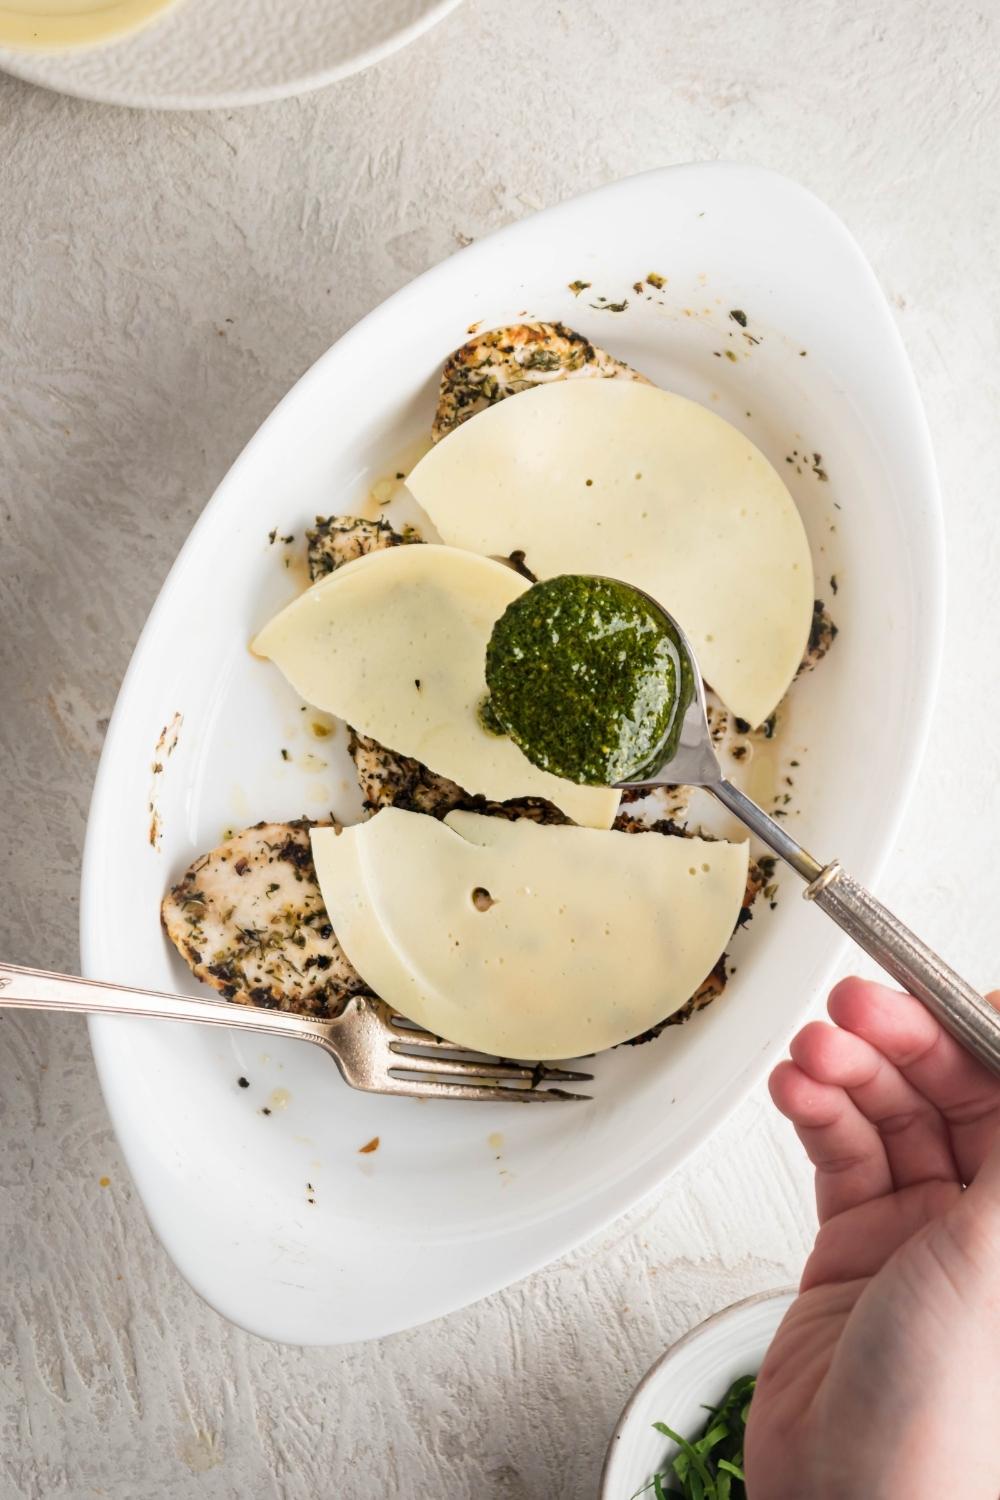 A hand holding a spoon that has pesto on it. The spoon is being held above three slices of mozzarella cheese on top of grilled chicken breasts in a white casserole dish.